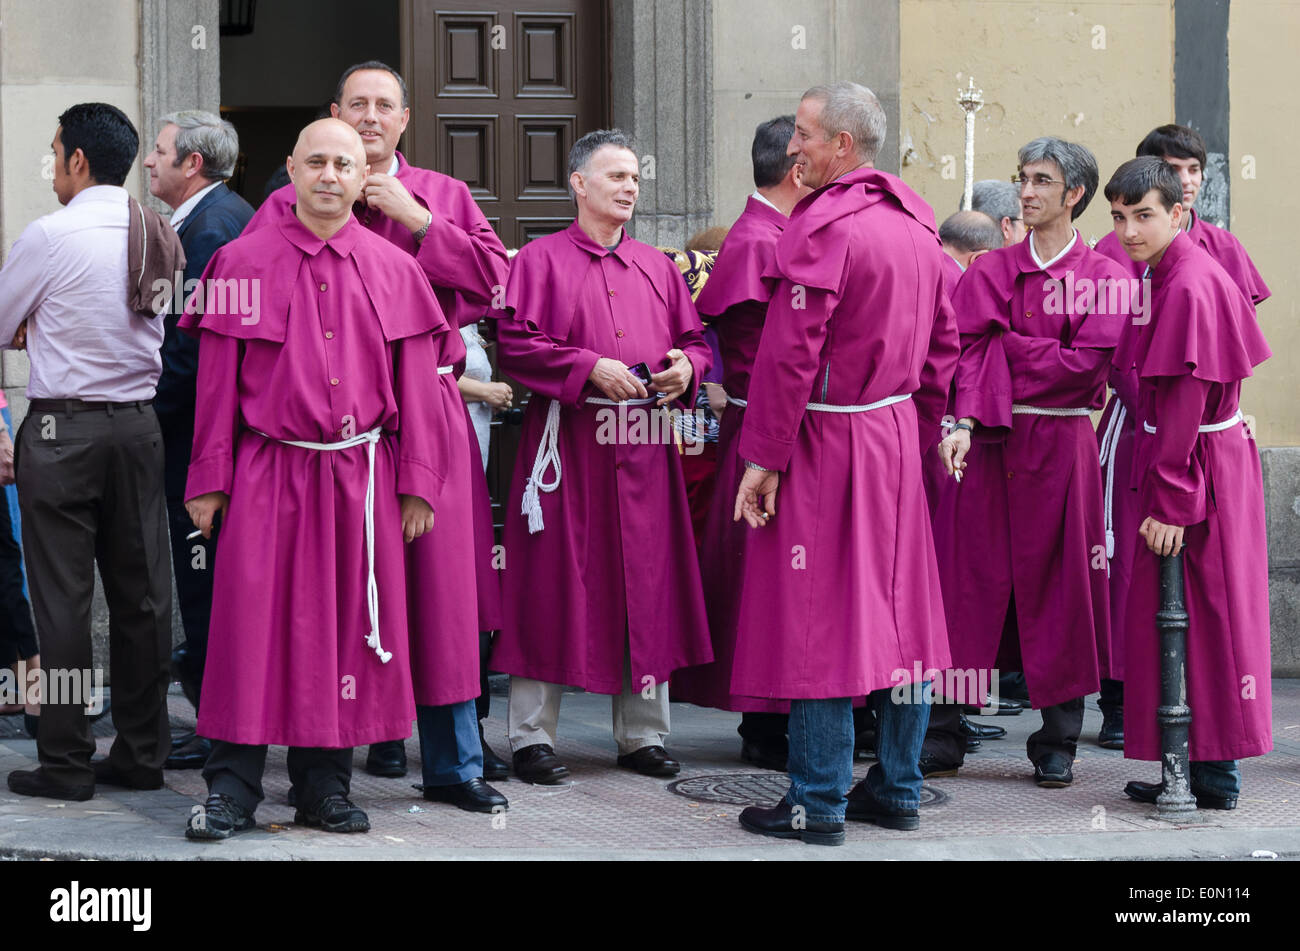 Madrid, Spain. 15th May, 2014. Fiesta de San Isidro, Madrid Credit:  Jennifer Booher/Alamy Live News. Acolytes gathering before the procession, Fiesta de San Isidro, Madrid. These men carry the statues of San Isidro and Santa Maria. Stock Photo